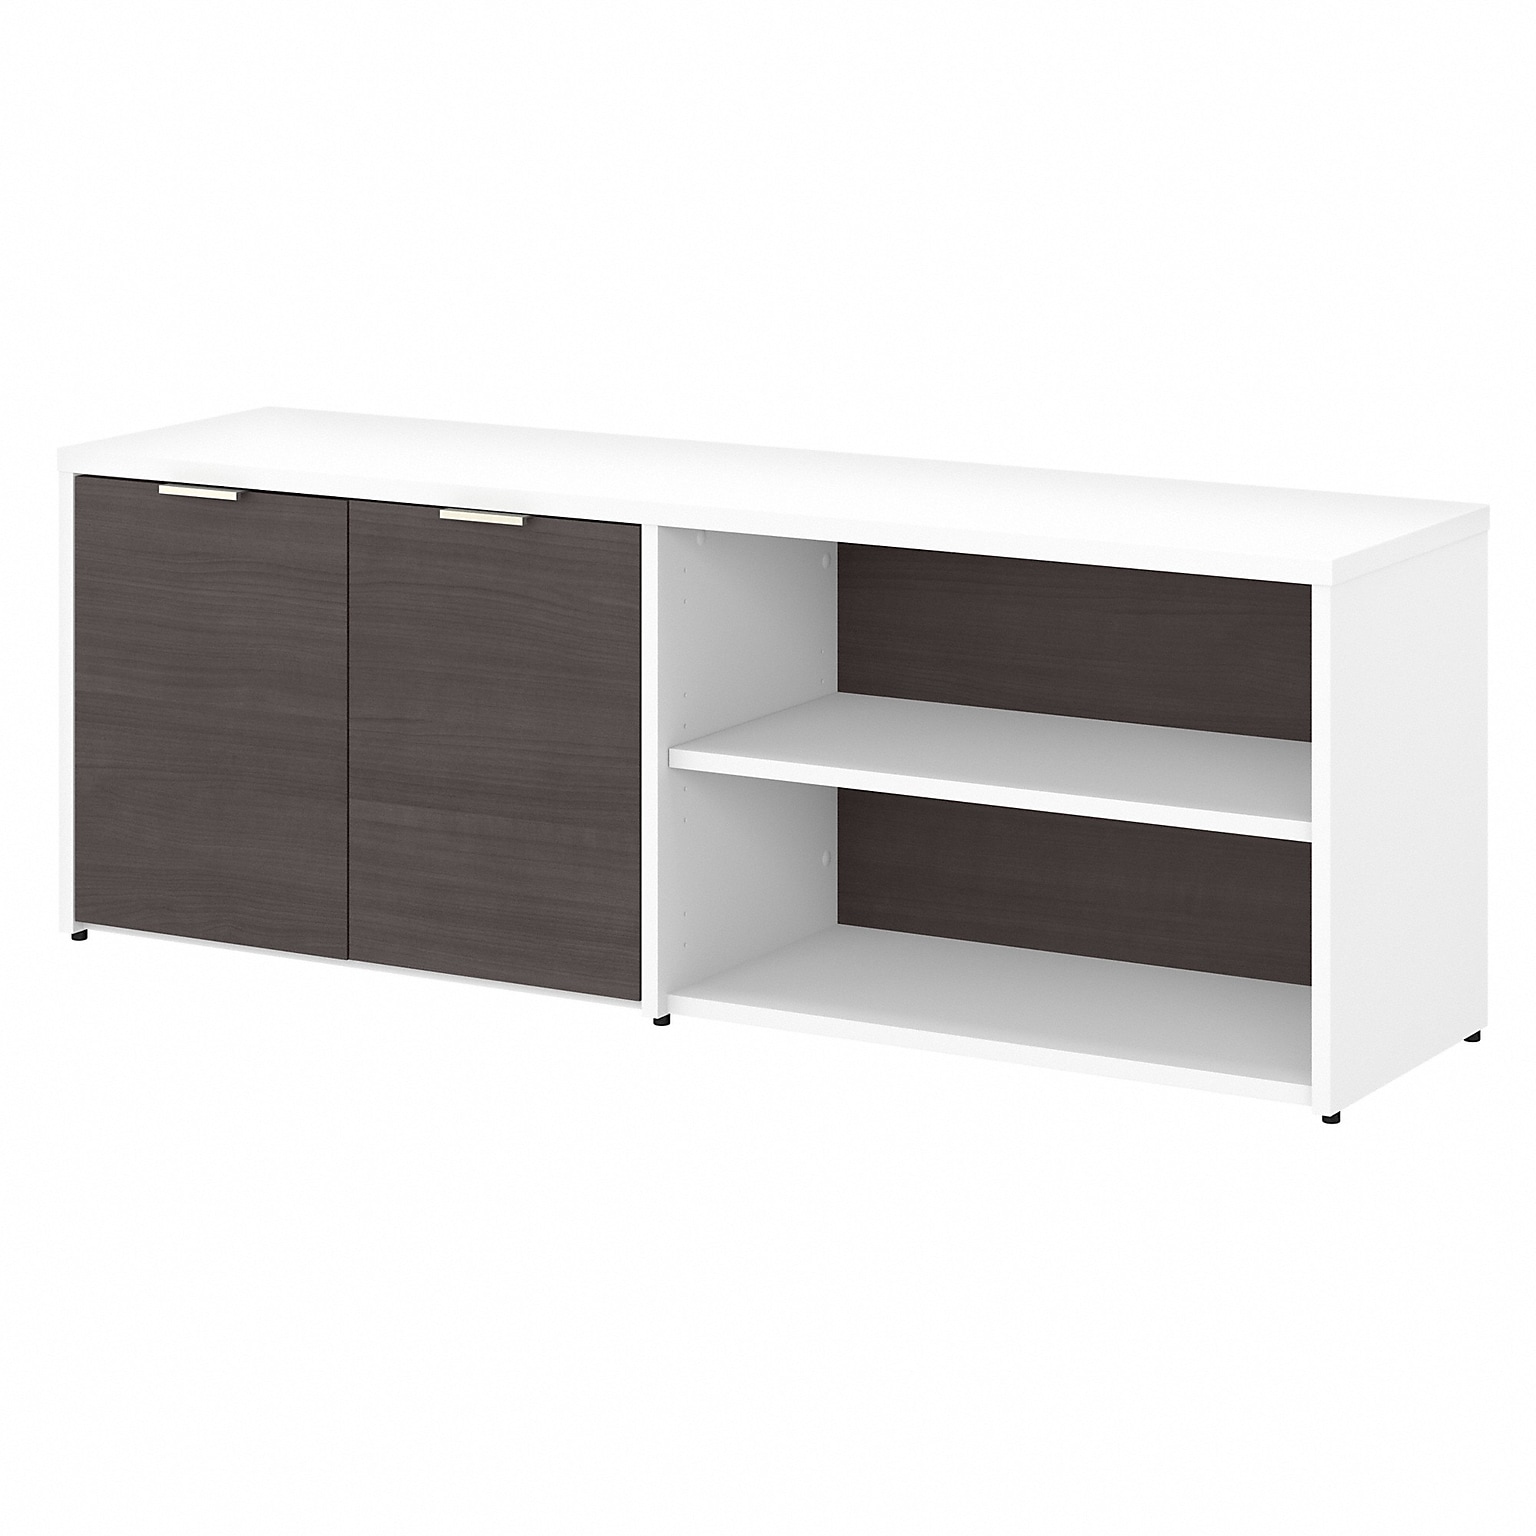 Bush Business Furniture Jamestown 21.2 Low Storage Cabinet with Doors and 4 Shelves, Storm Gray/White (JTS160SGWH)